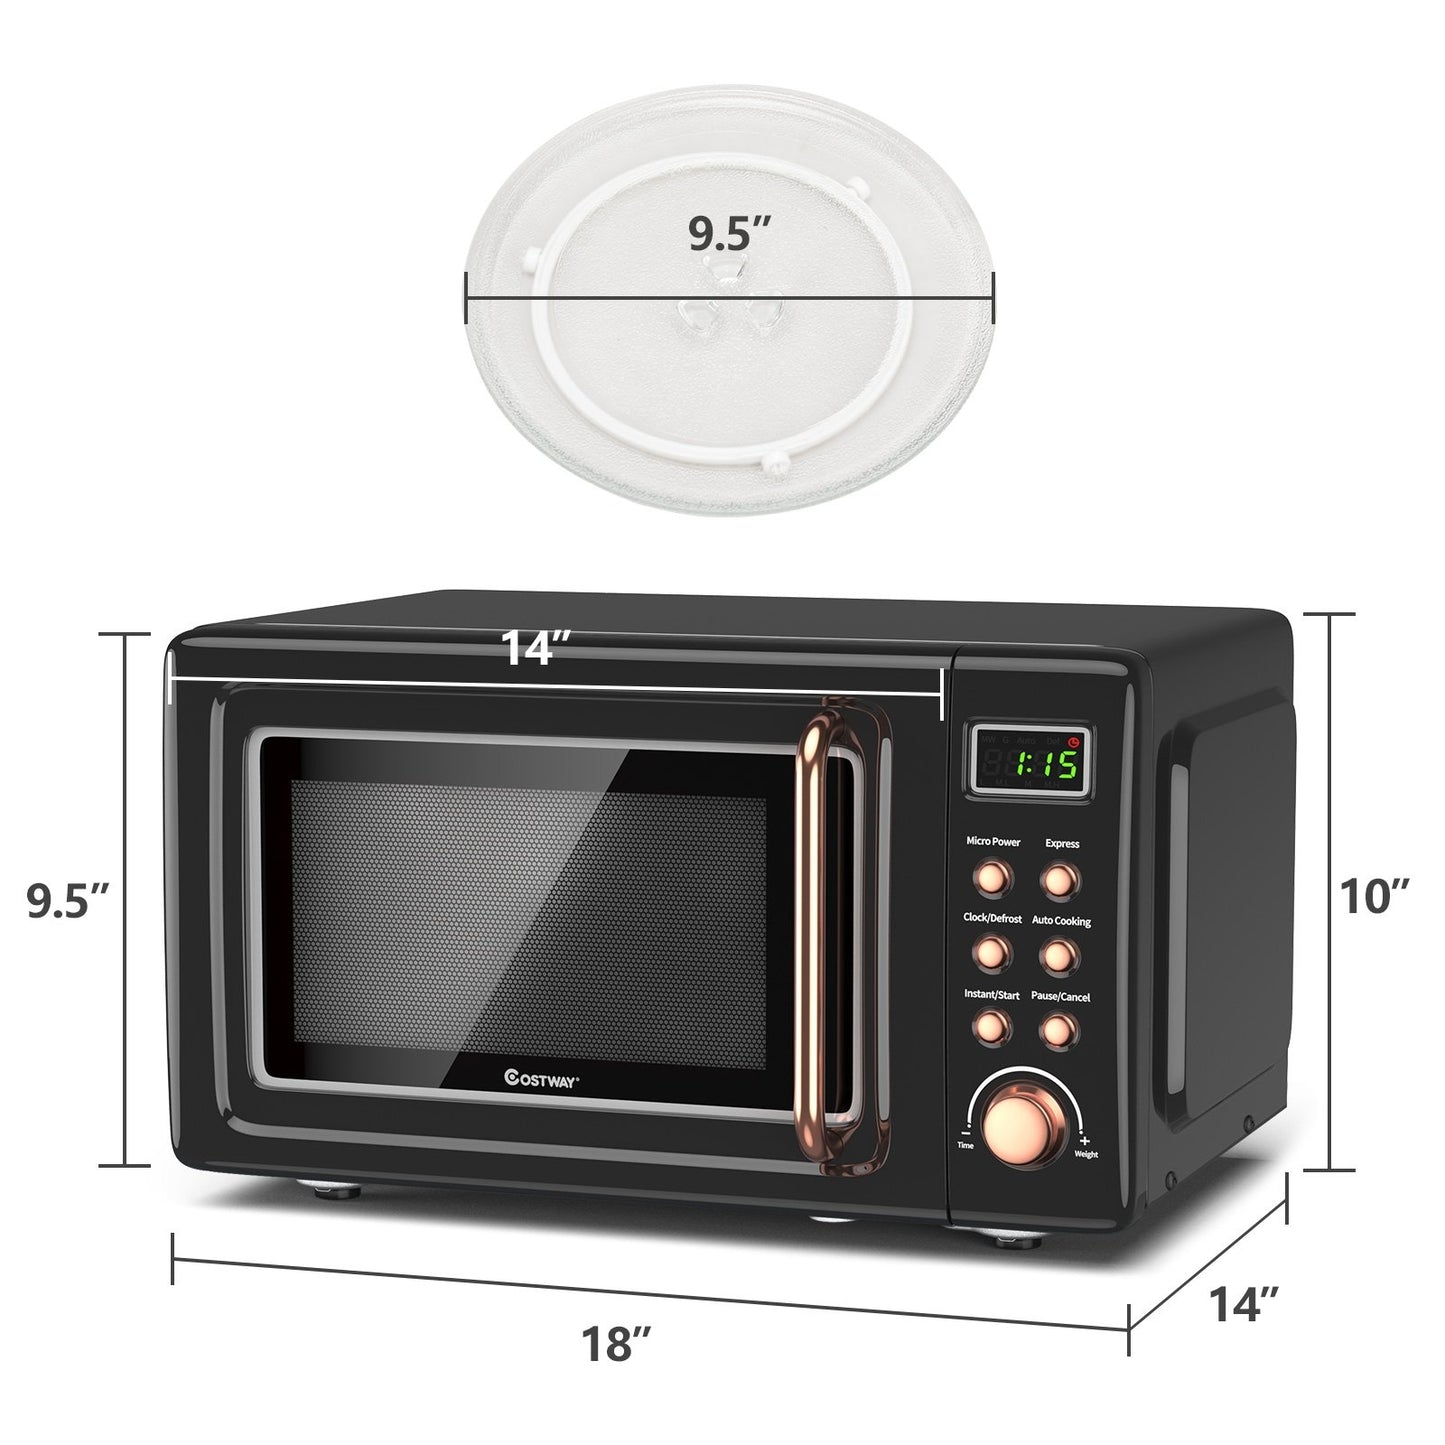 700W Retro Countertop Microwave Oven with 5 Micro Power and Auto Cooking Function, Golden